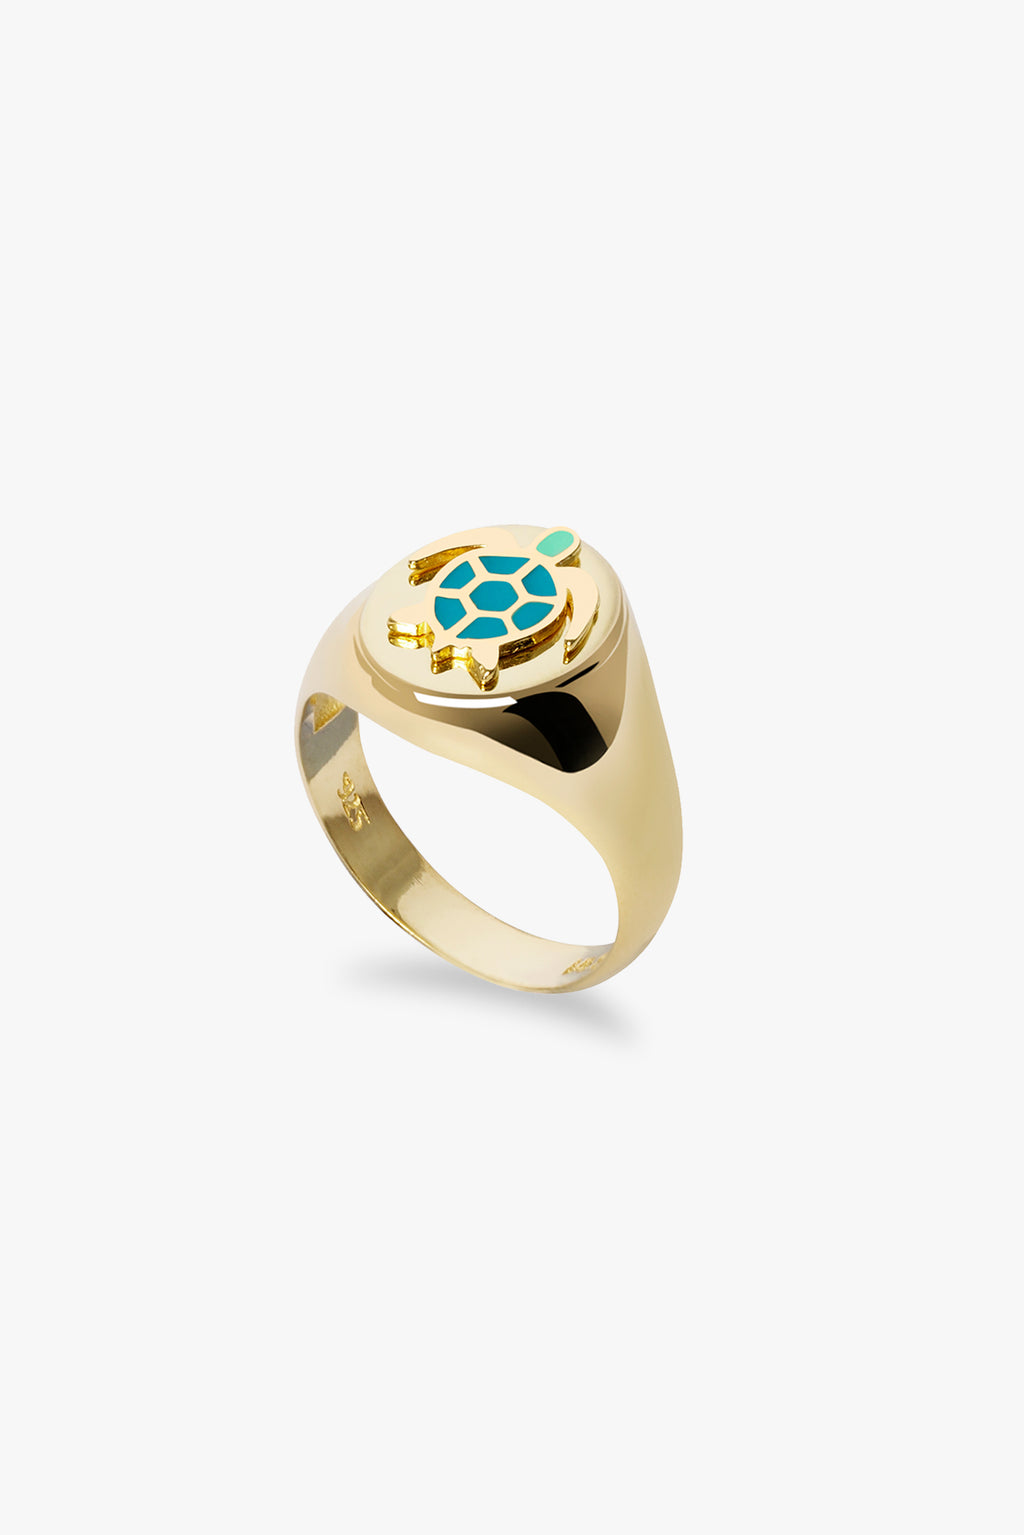 Buy GOLD PLATED Good Luck Kachua RING /Tortoise RING turtle RING for Men  and Women Online In India At Discounted Prices